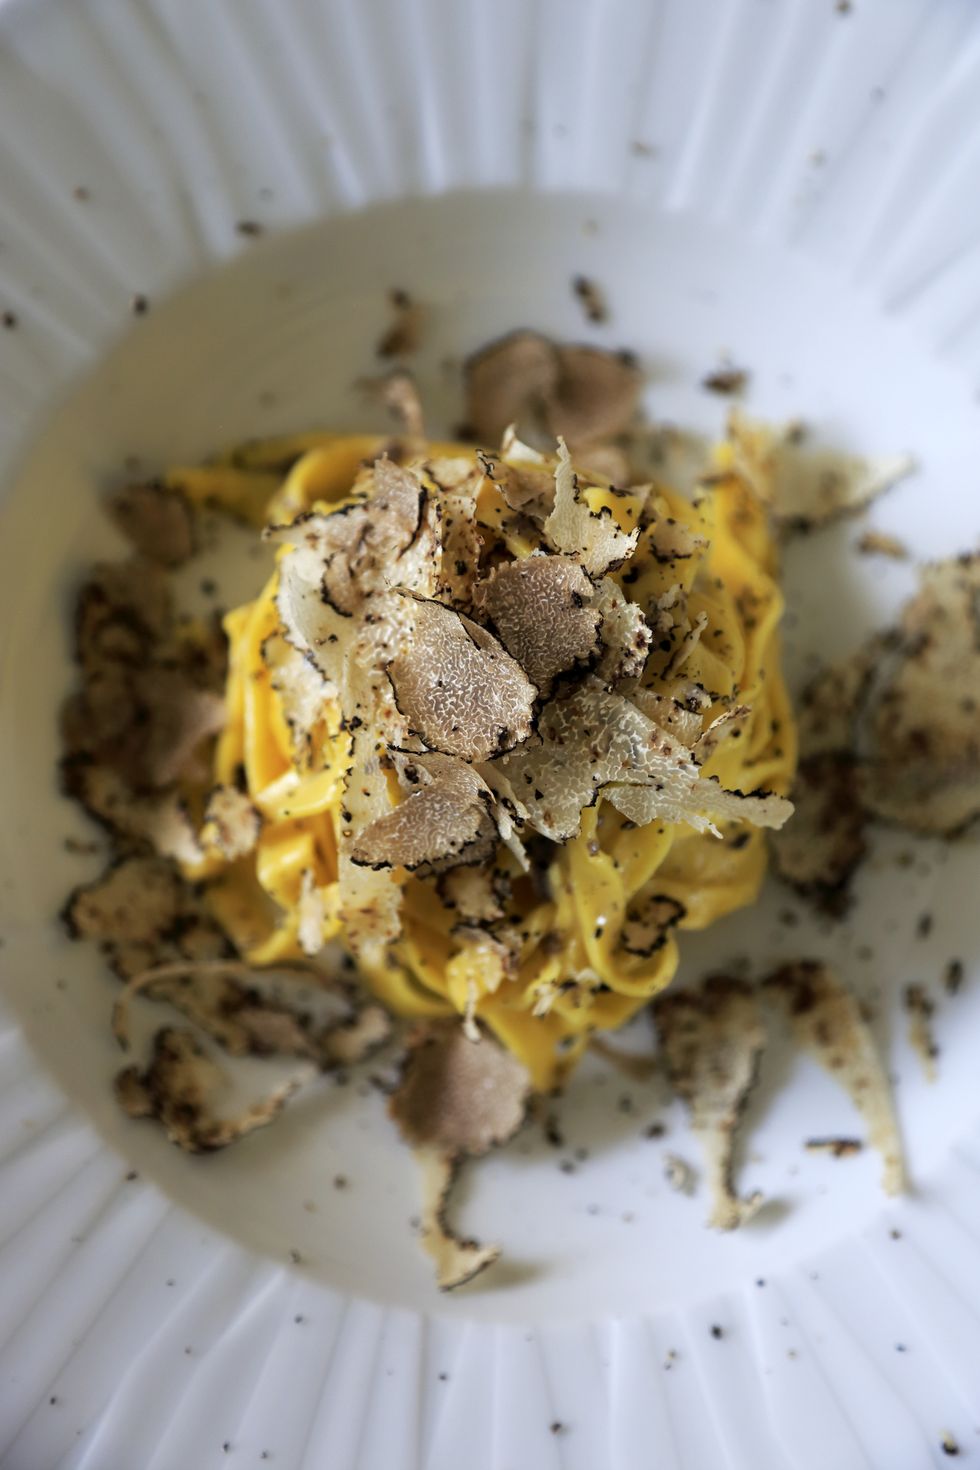 a closed up view of a dish of hand made egg pasta with truffle